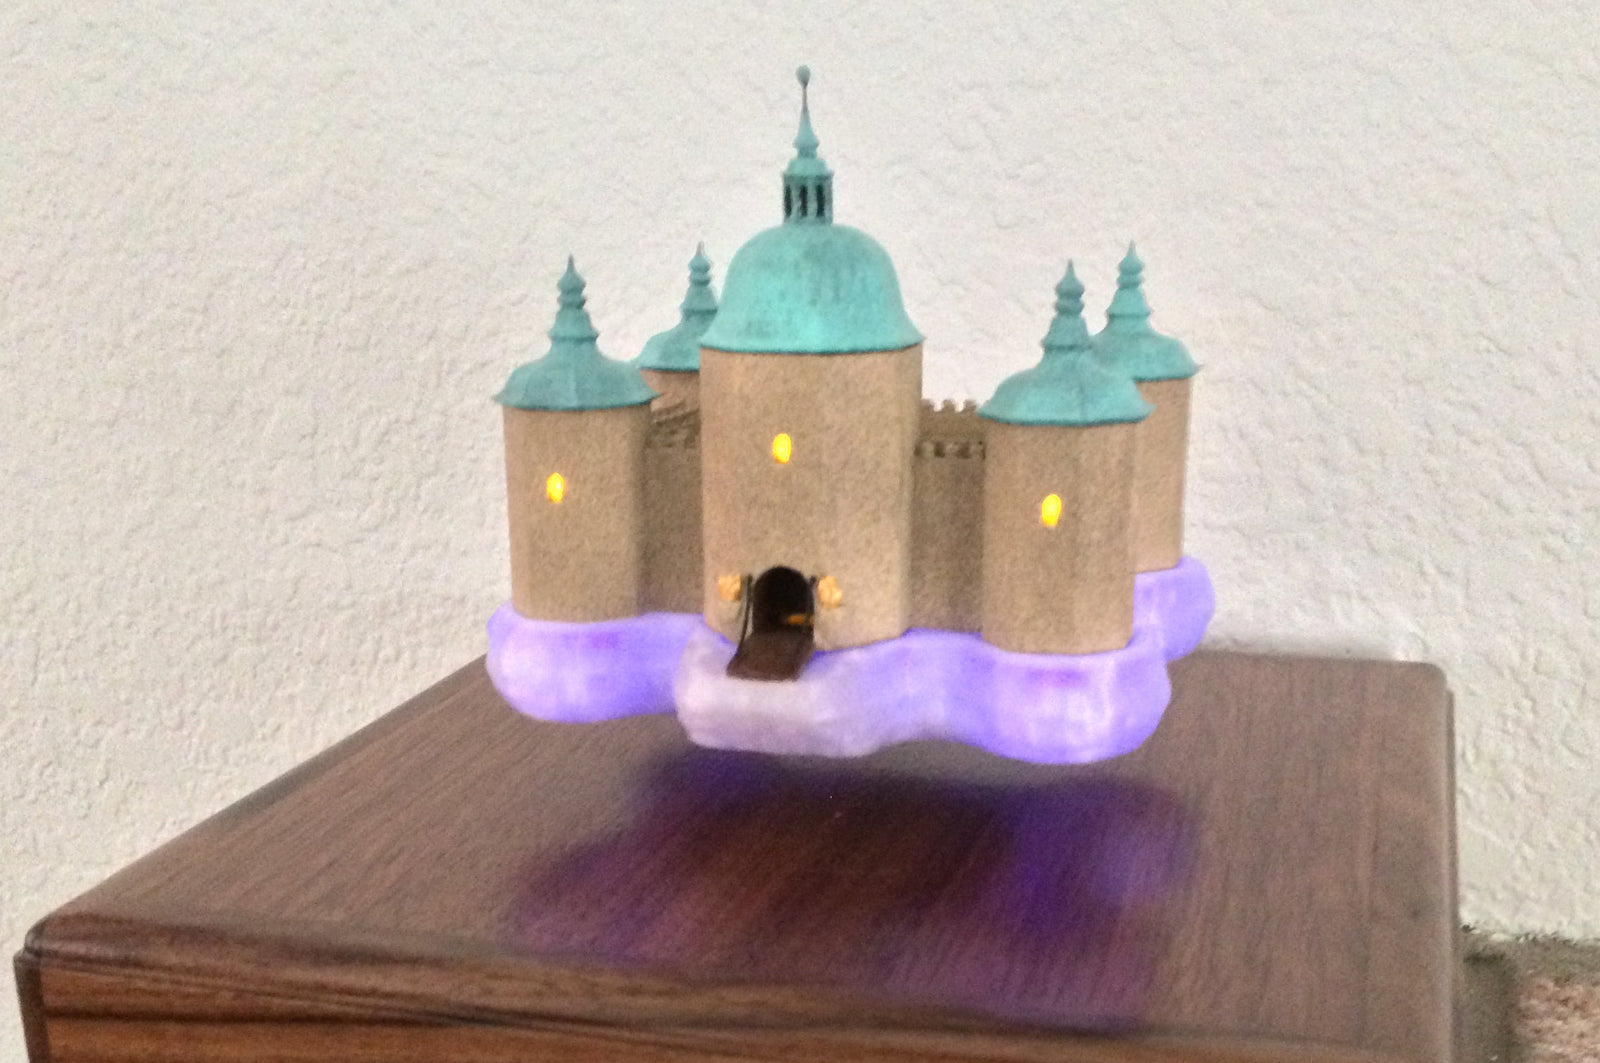 Musical Laser Rainbows and 3D Printed Floating Castles | Meet Artist Vic Chaney